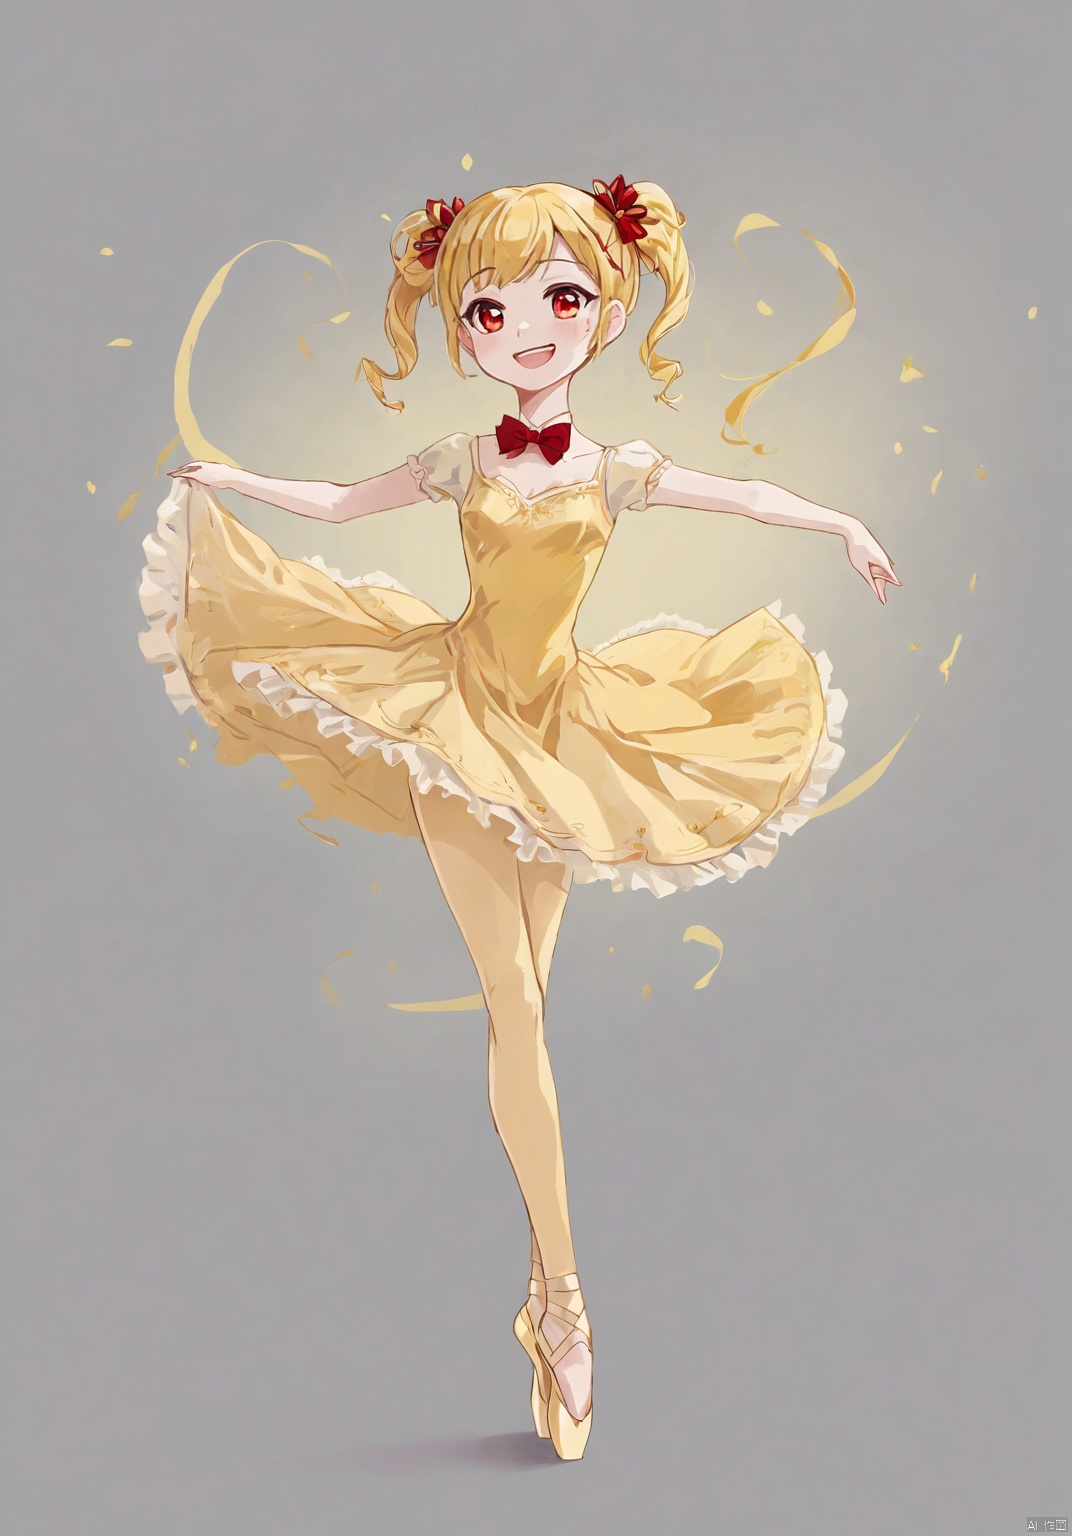  (best quality), ((masterpiece)), (highres),standing,original, extremely detailed wallpaper, (an extremely delicate and beautiful),(petite:1.2),yellow hair,red eyes,twin_tails,hair flower,fipped hair,floating hair,red bowtie, white dance dress,simple drawing,detailed background,elegant,smiling,dancing pose,dancing,ballet,tiara the result is a culturally rich portrayal that celebrates beauty, grace, and the uplifting emotions brought forth by the art of ballet,leg up:0.3, yellow tone color,full body,